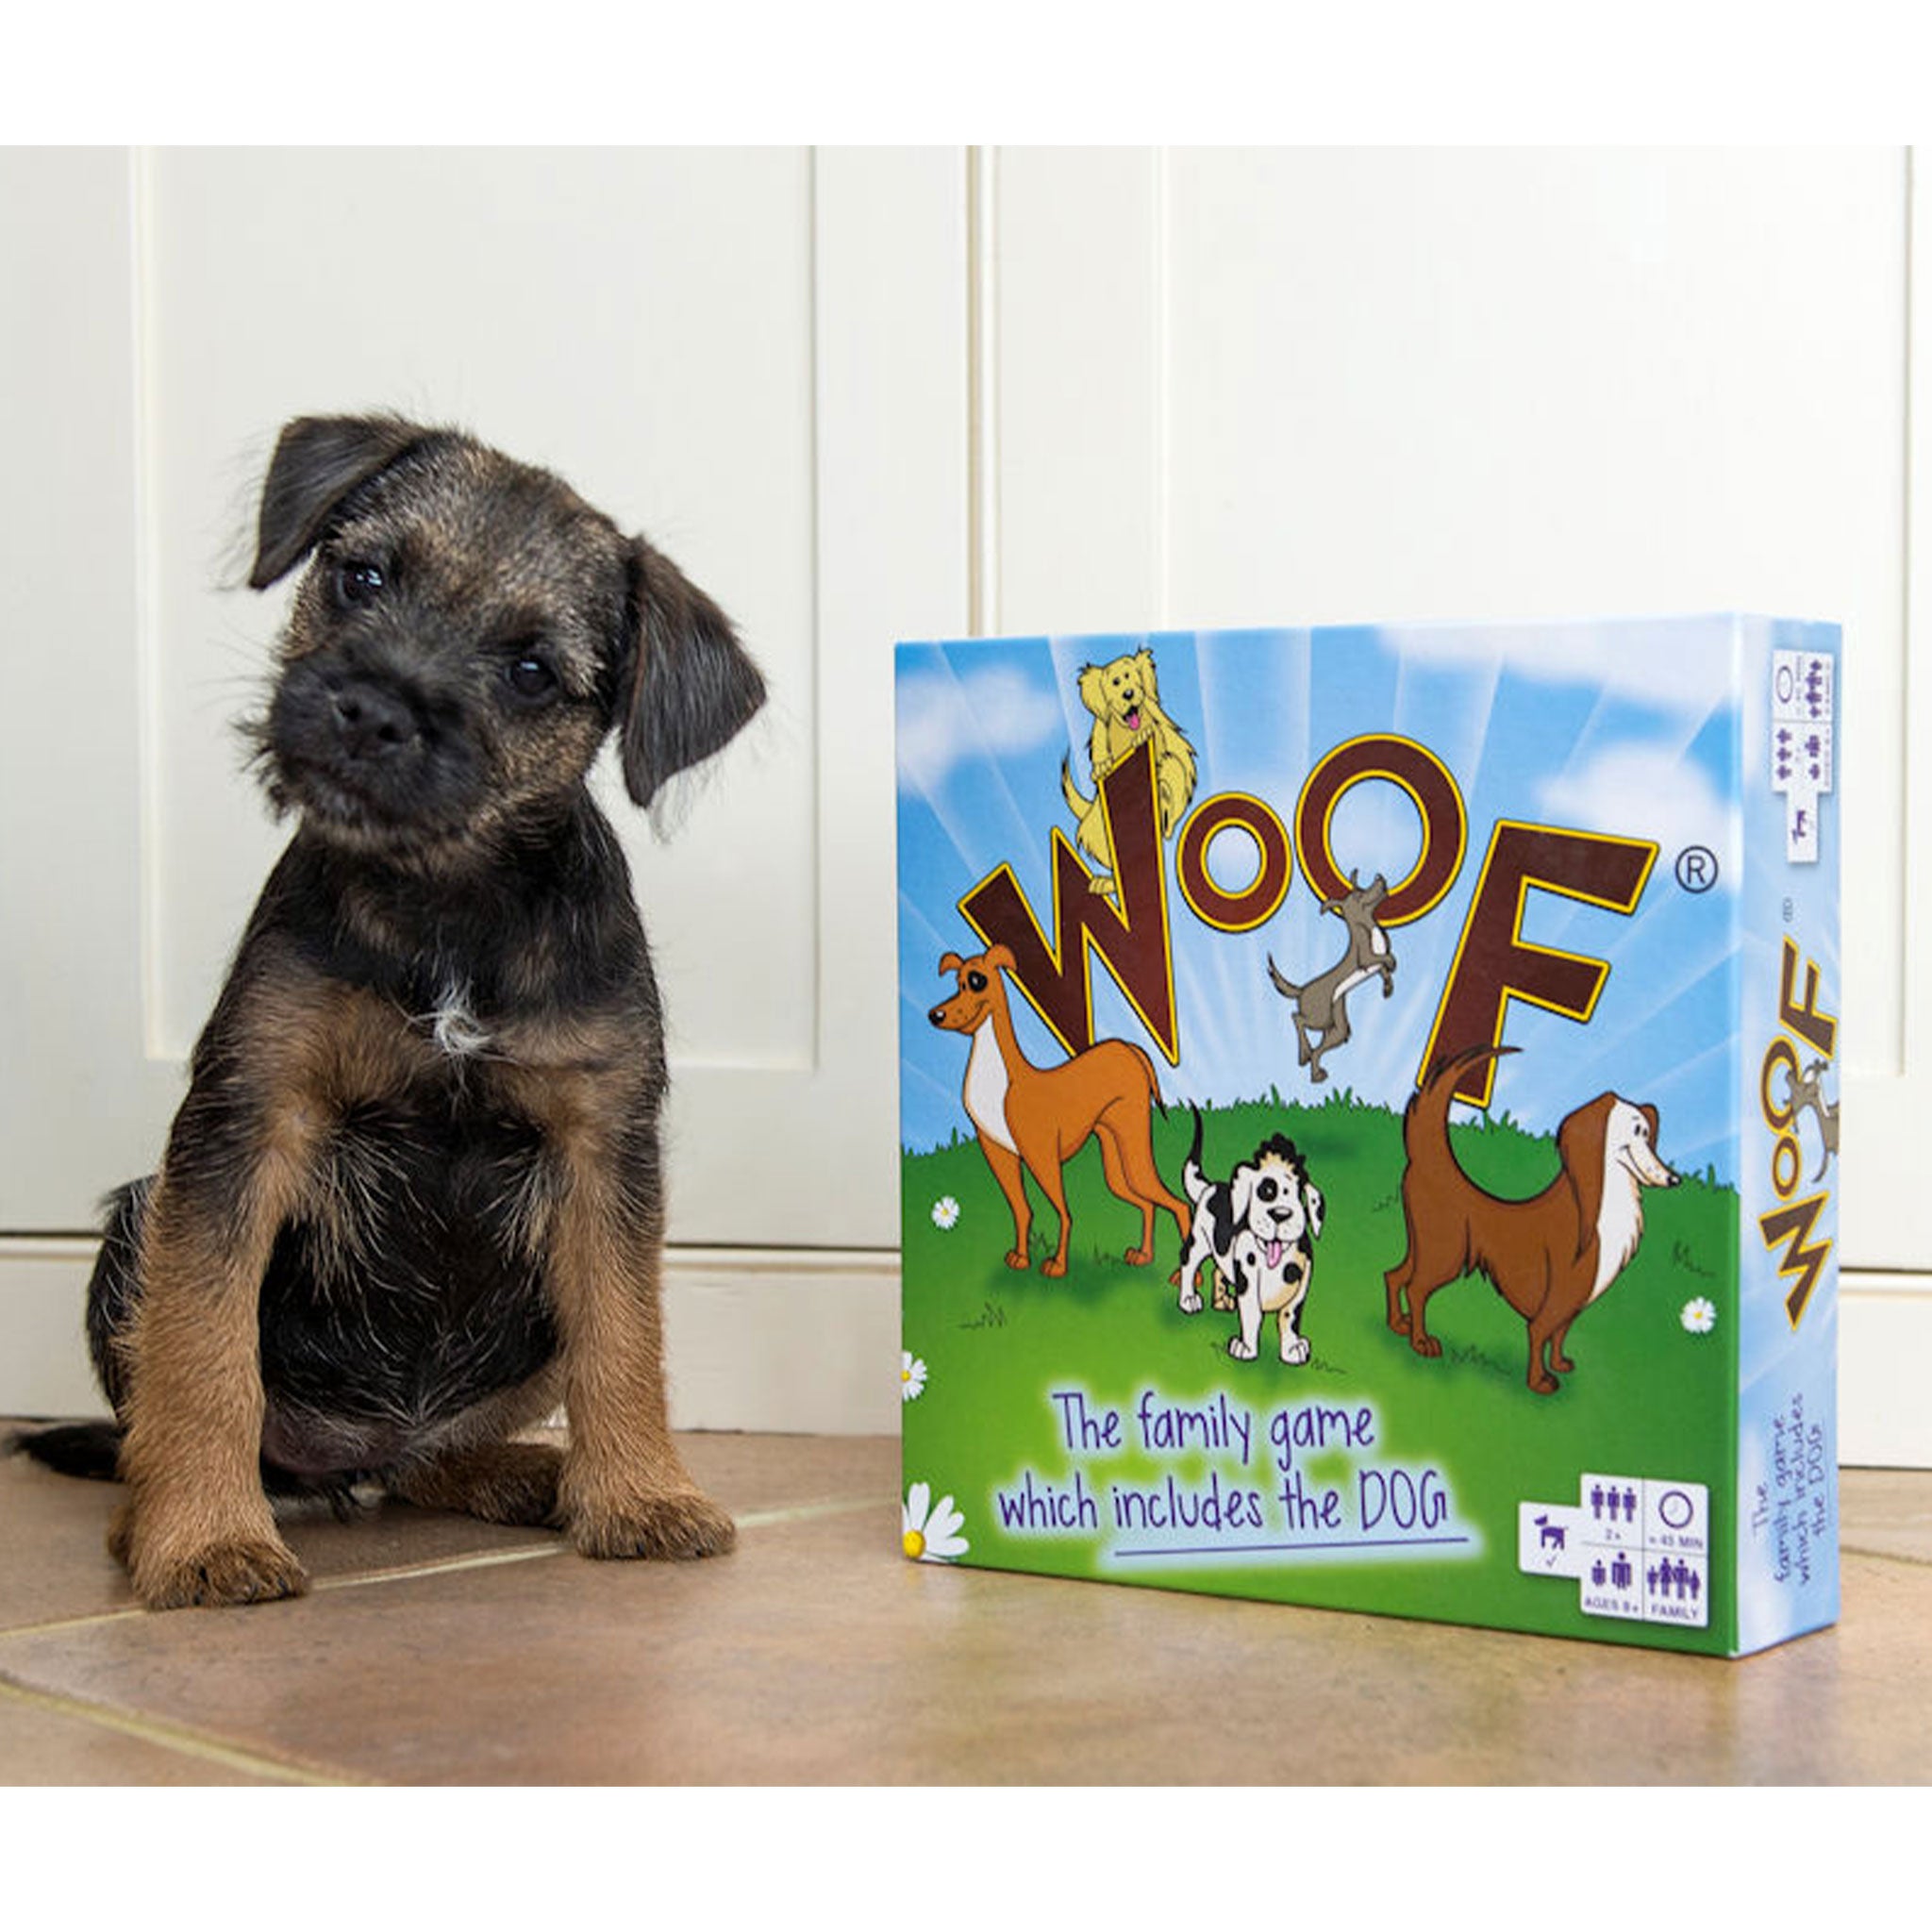 A lifestyle image of a dog sat next to the Woof board game.